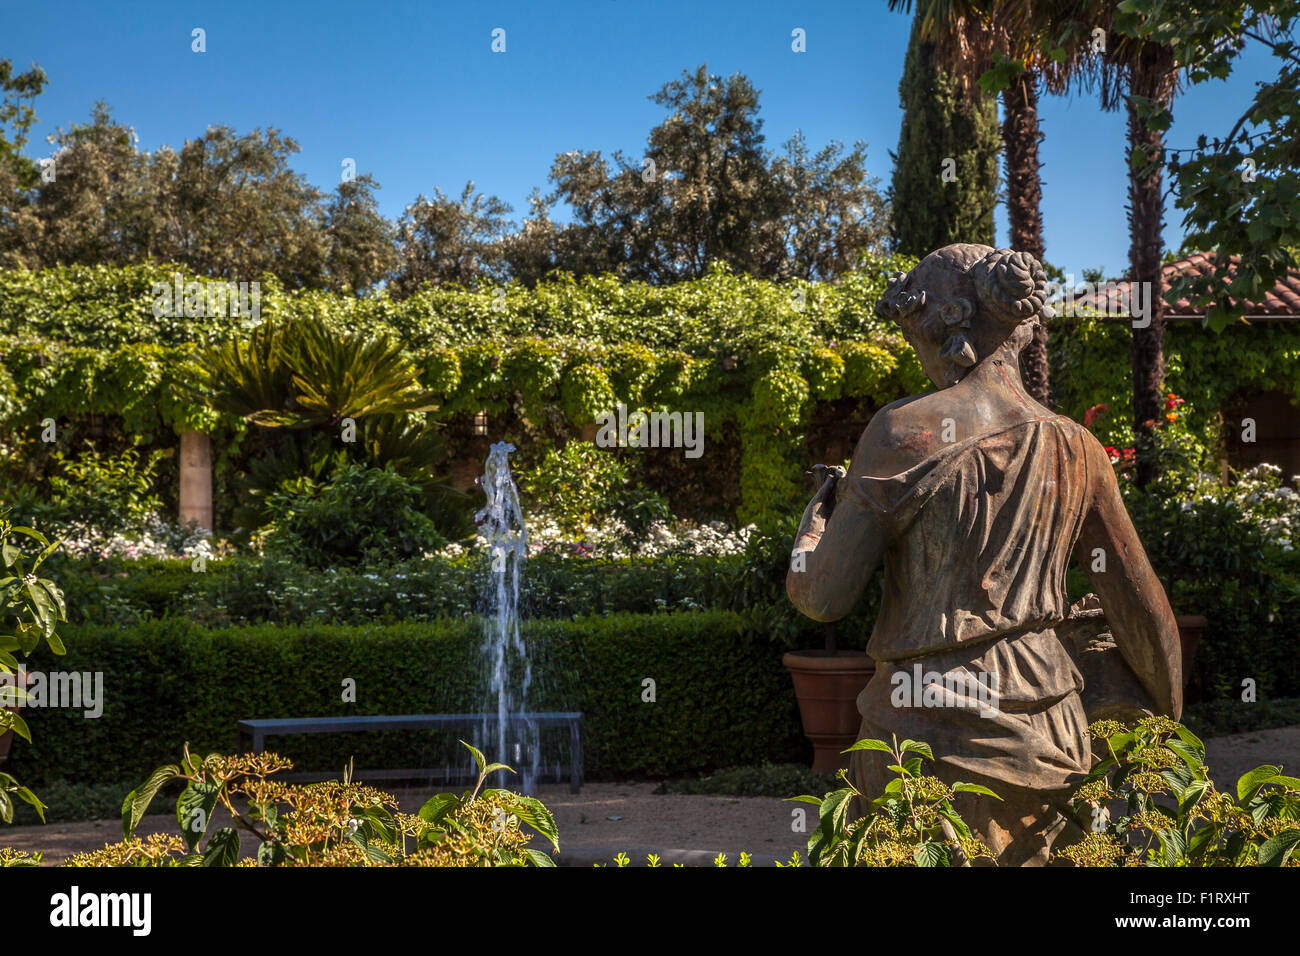 Statue in the garden of Chateau St. Jean Estate vineyards and winery, Kenwood, Sonoma, California, USA Stock Photo